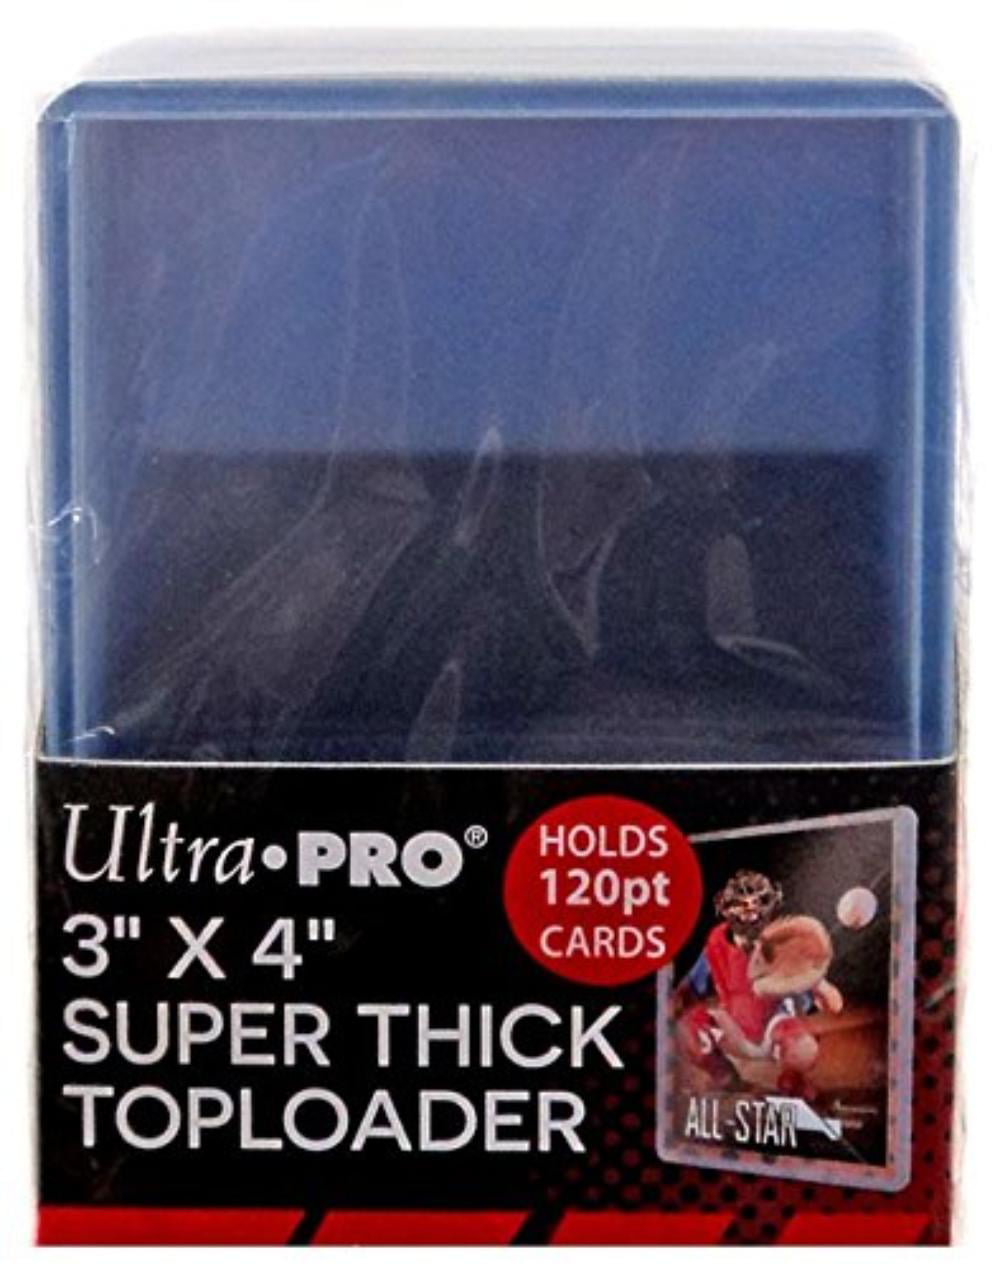 THICK SUPER THICK 3 NEW ULTRA PRO 3"X4" CARD TOPLOADER PACK SIZES REGULAR 